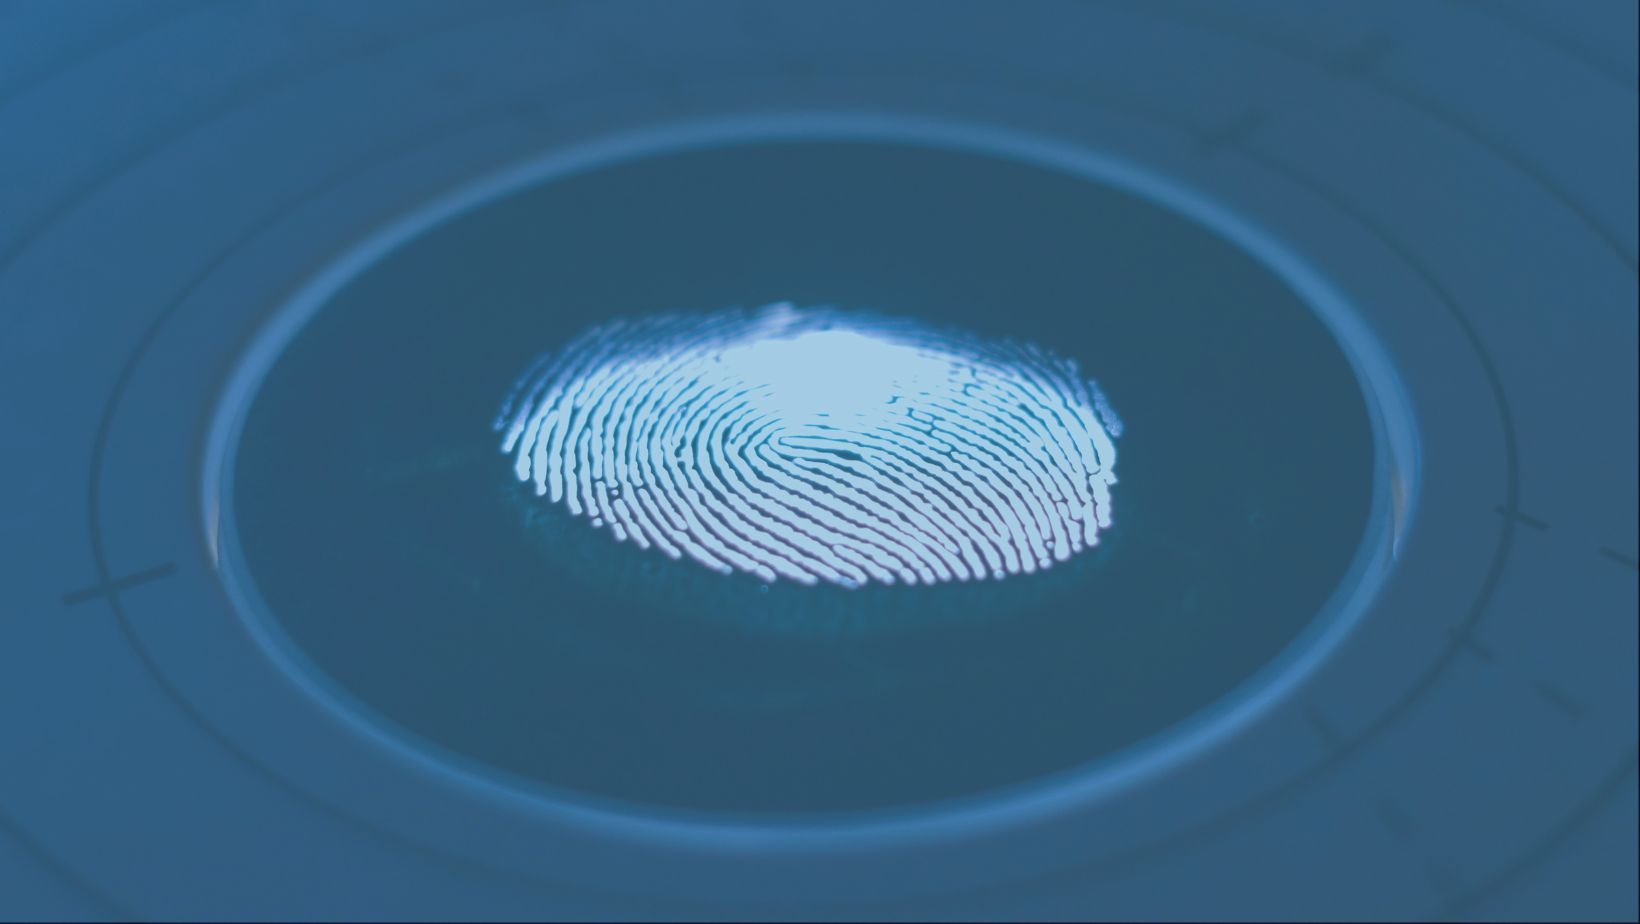 ASIC for analyzing and processing fingerprint signature